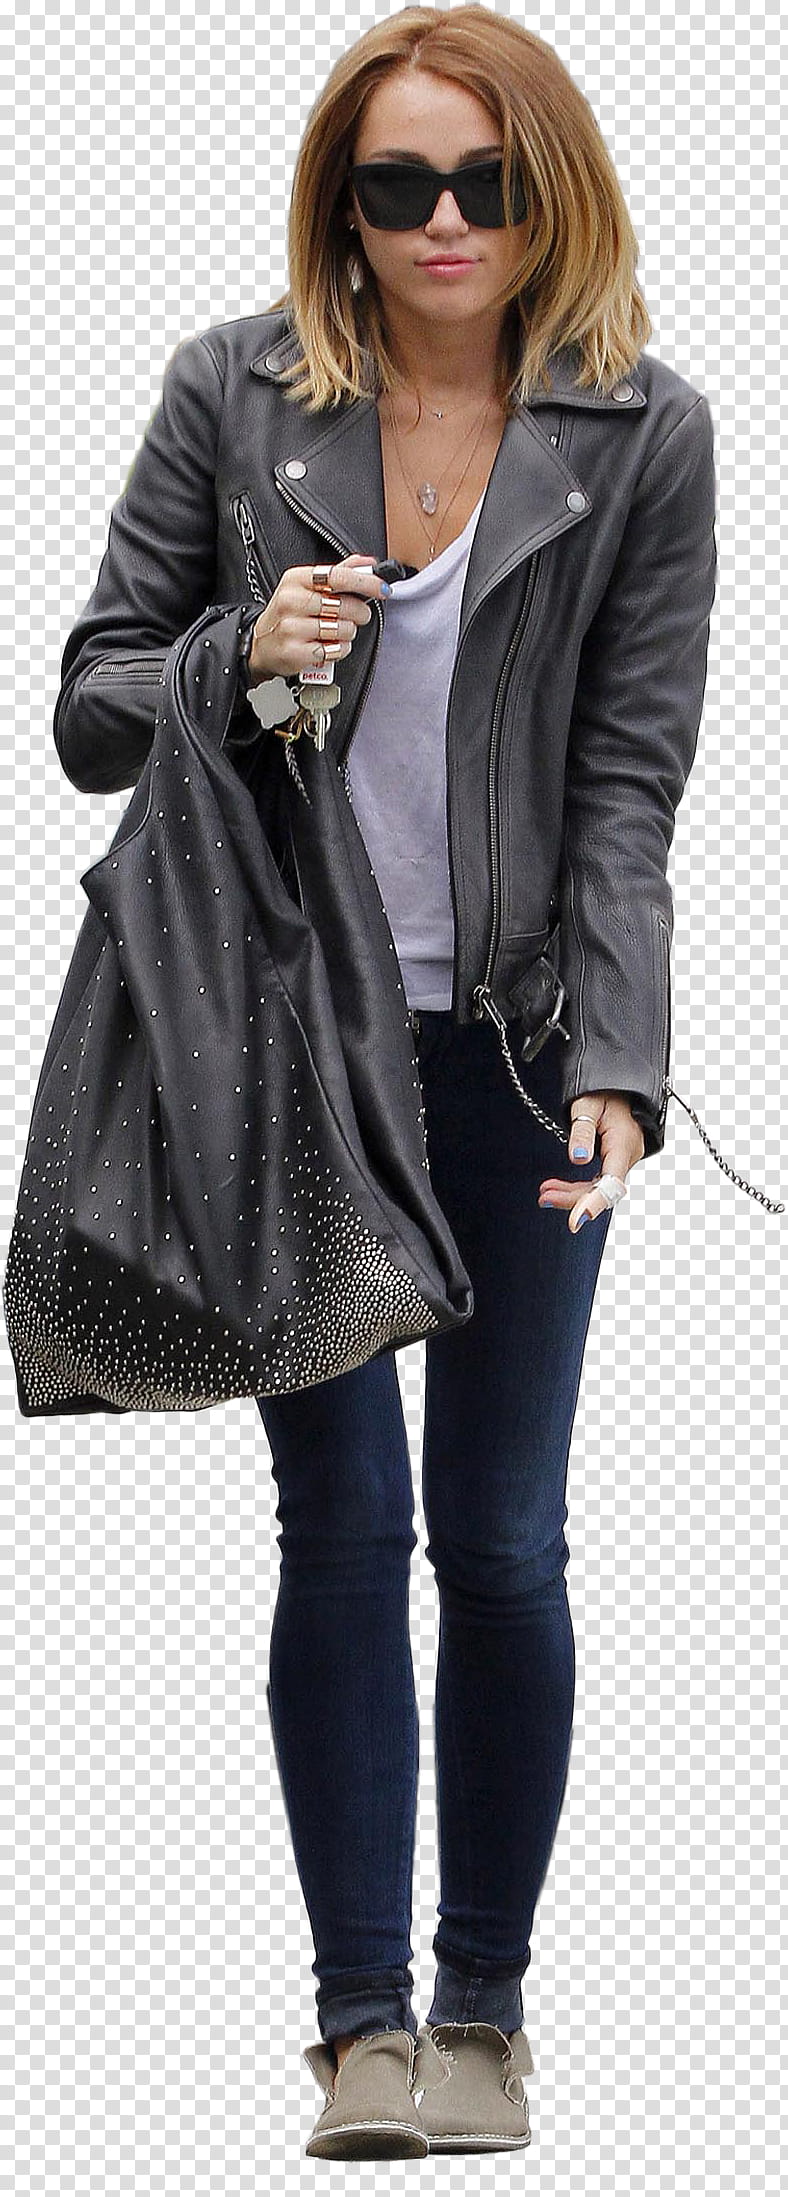 Miley Cyrus, woman wearing gray zip-up jacket ad black fitted jeans transparent background PNG clipart